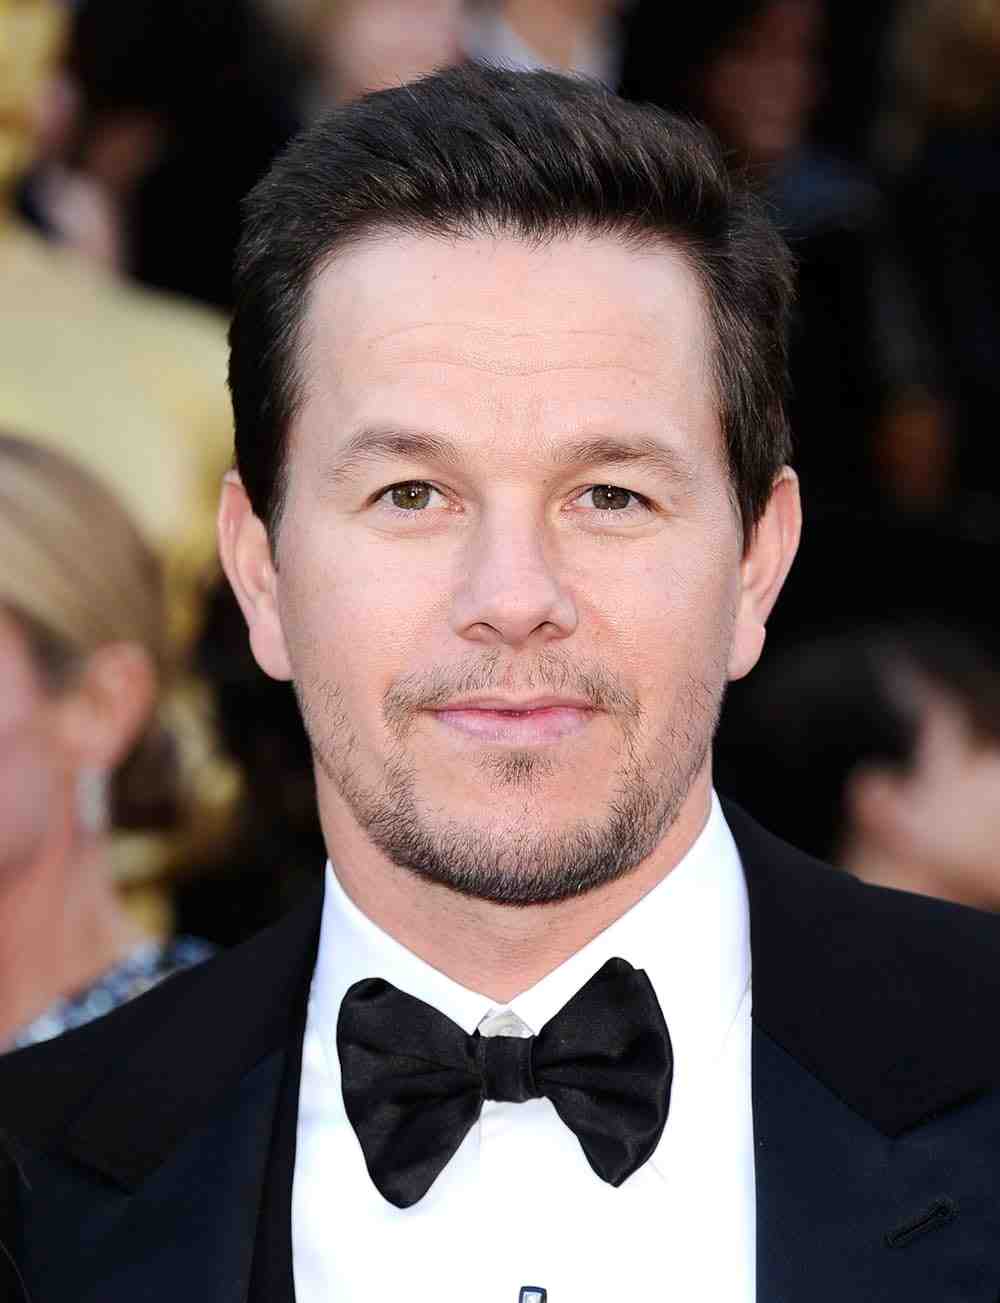 Did Mark Wahlberg bare it all in 'The Family Plan'? Dive into the pop-culture mystery that's got everyone questioning: "Mark Wahlberg nude" or not? This debate rages on.